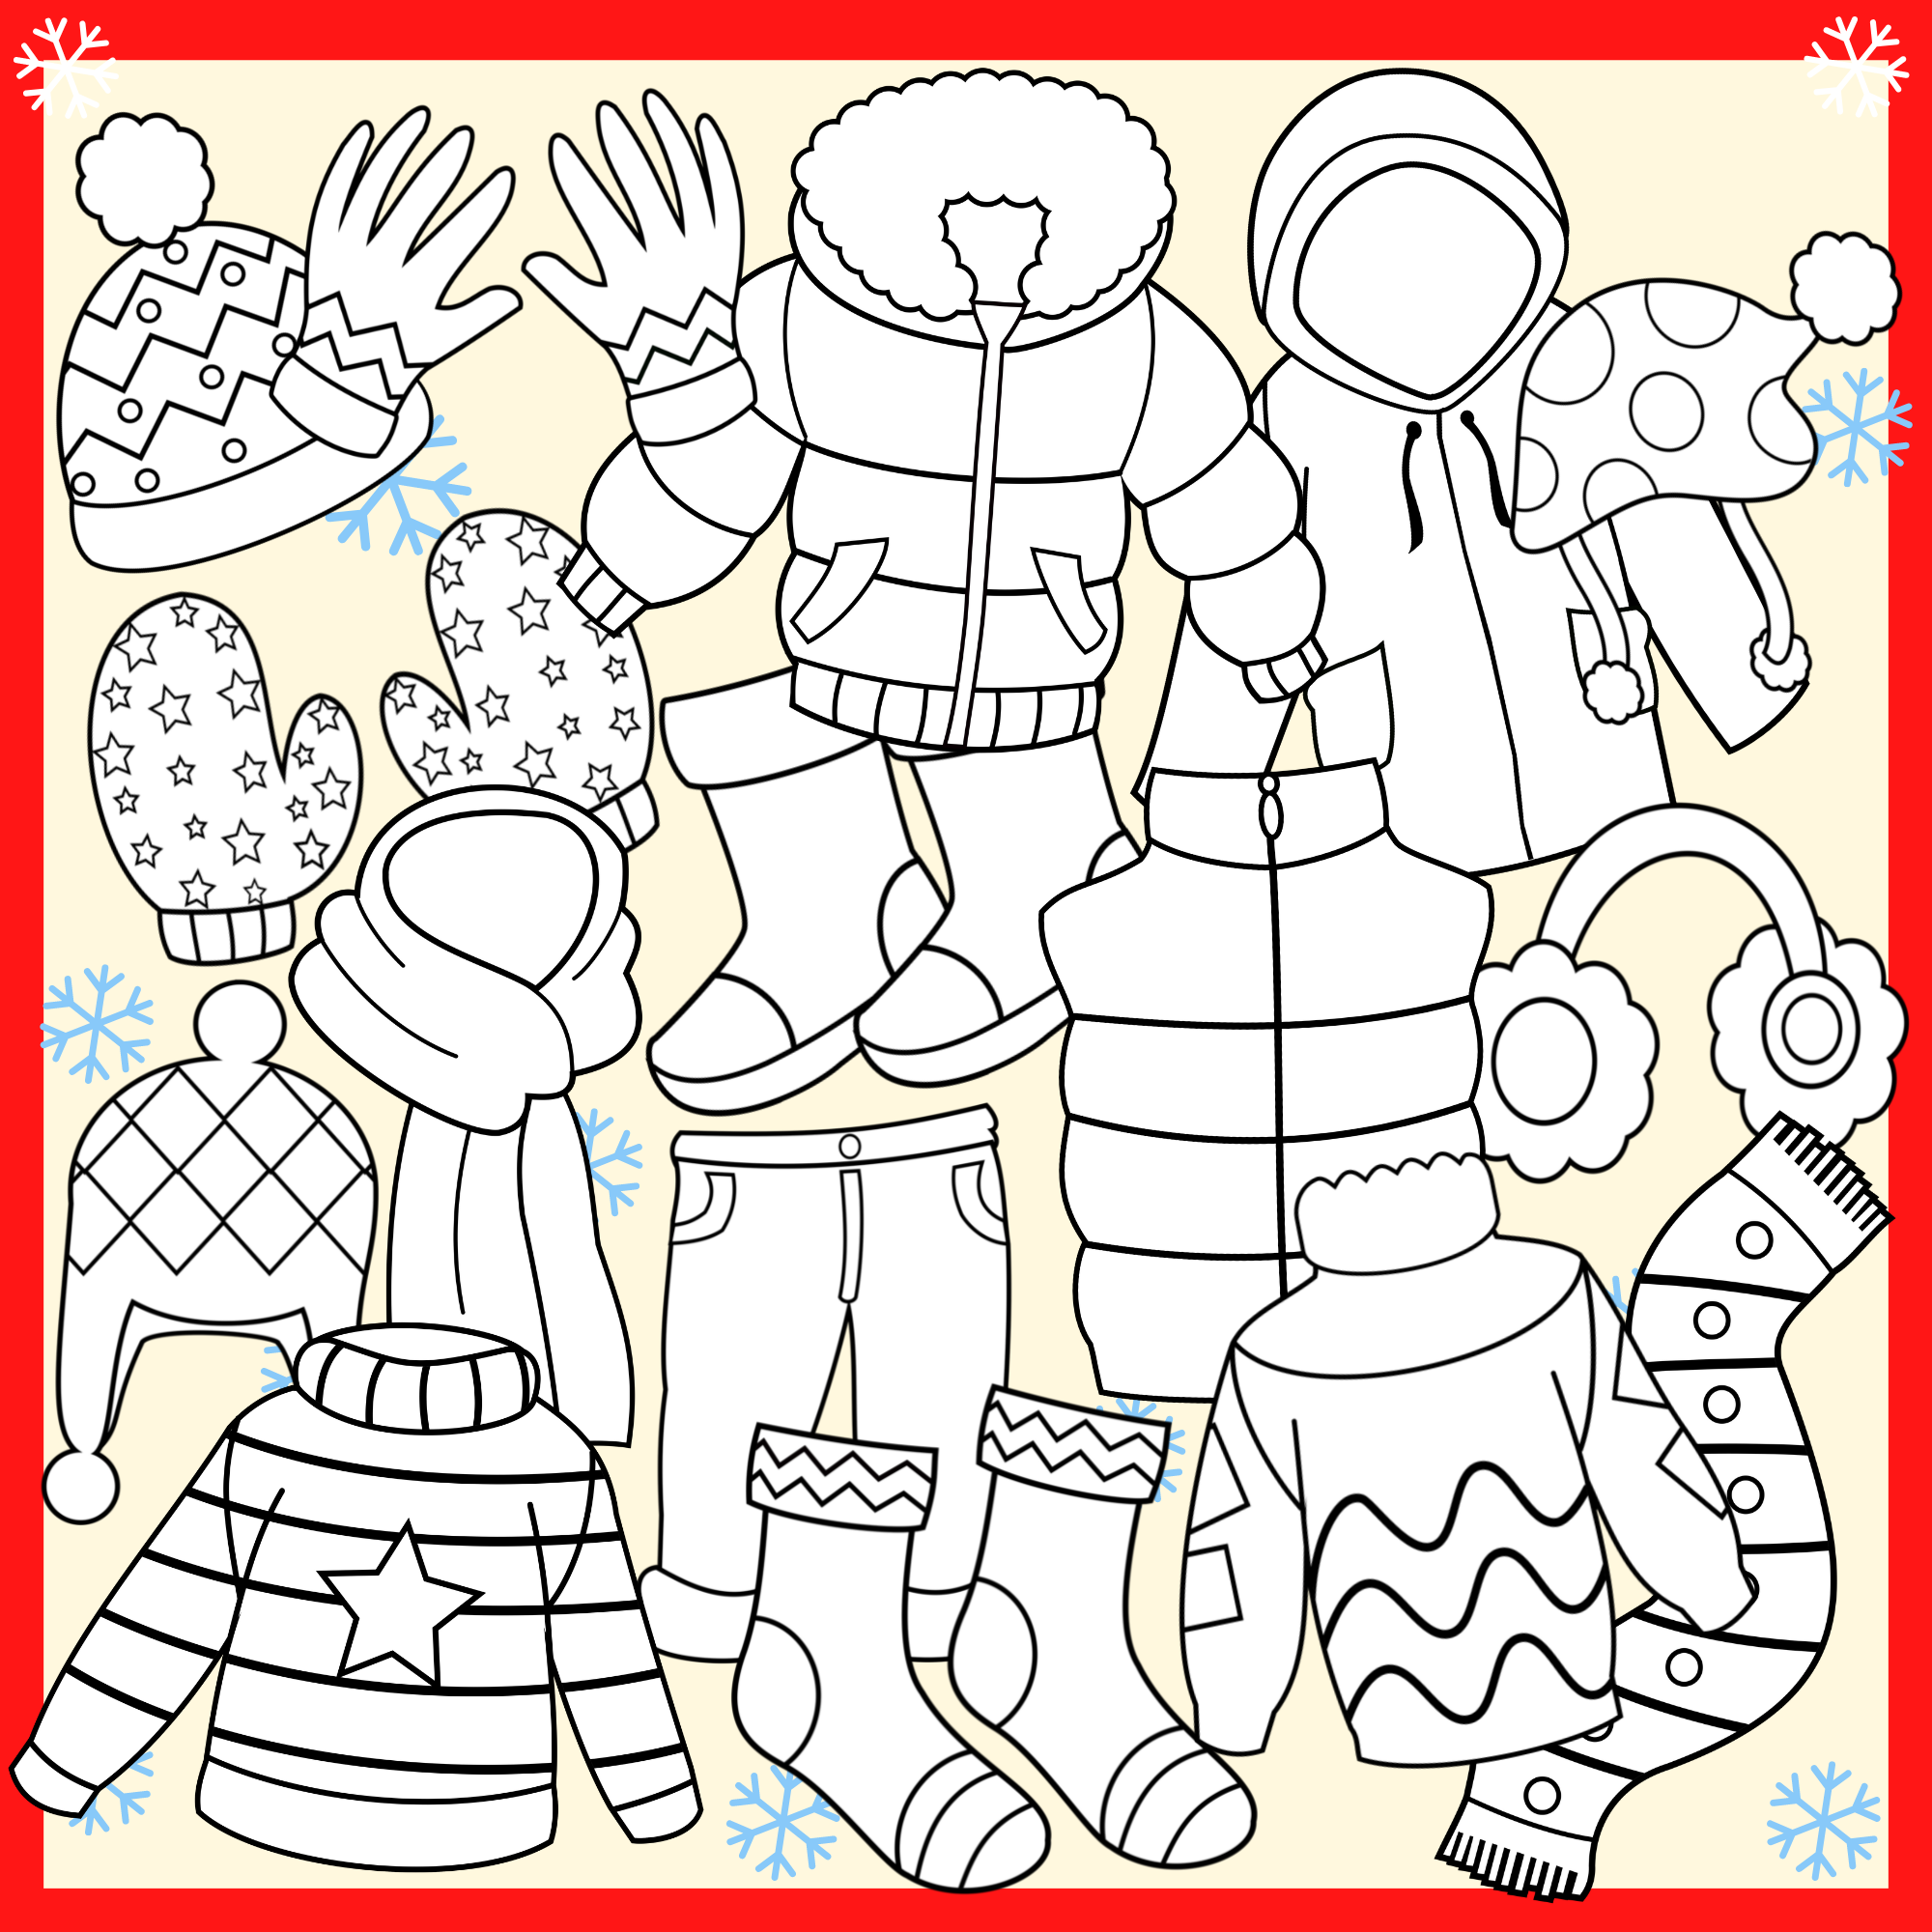 Warm winter clothes clipart made by teachers